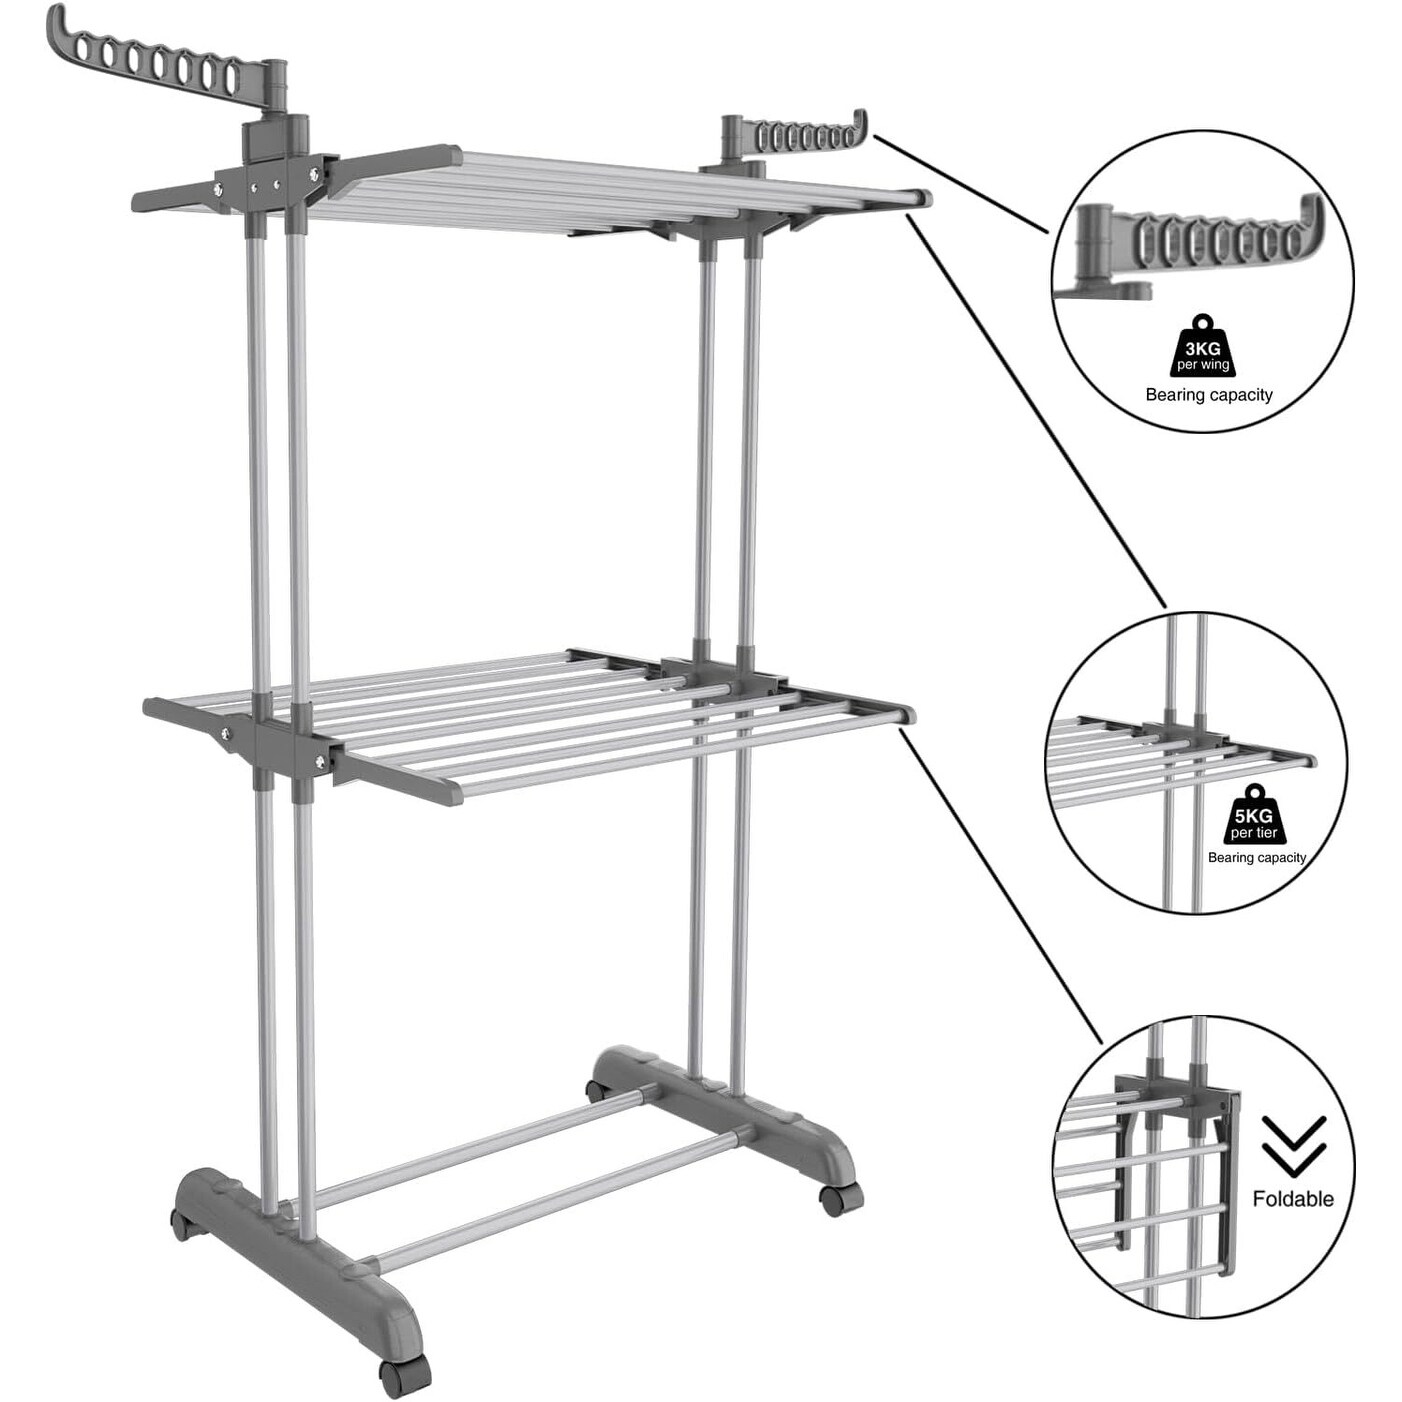 SONGMICS 2-Level Clothes Drying Rack, Stainless Steel Laundry Rack